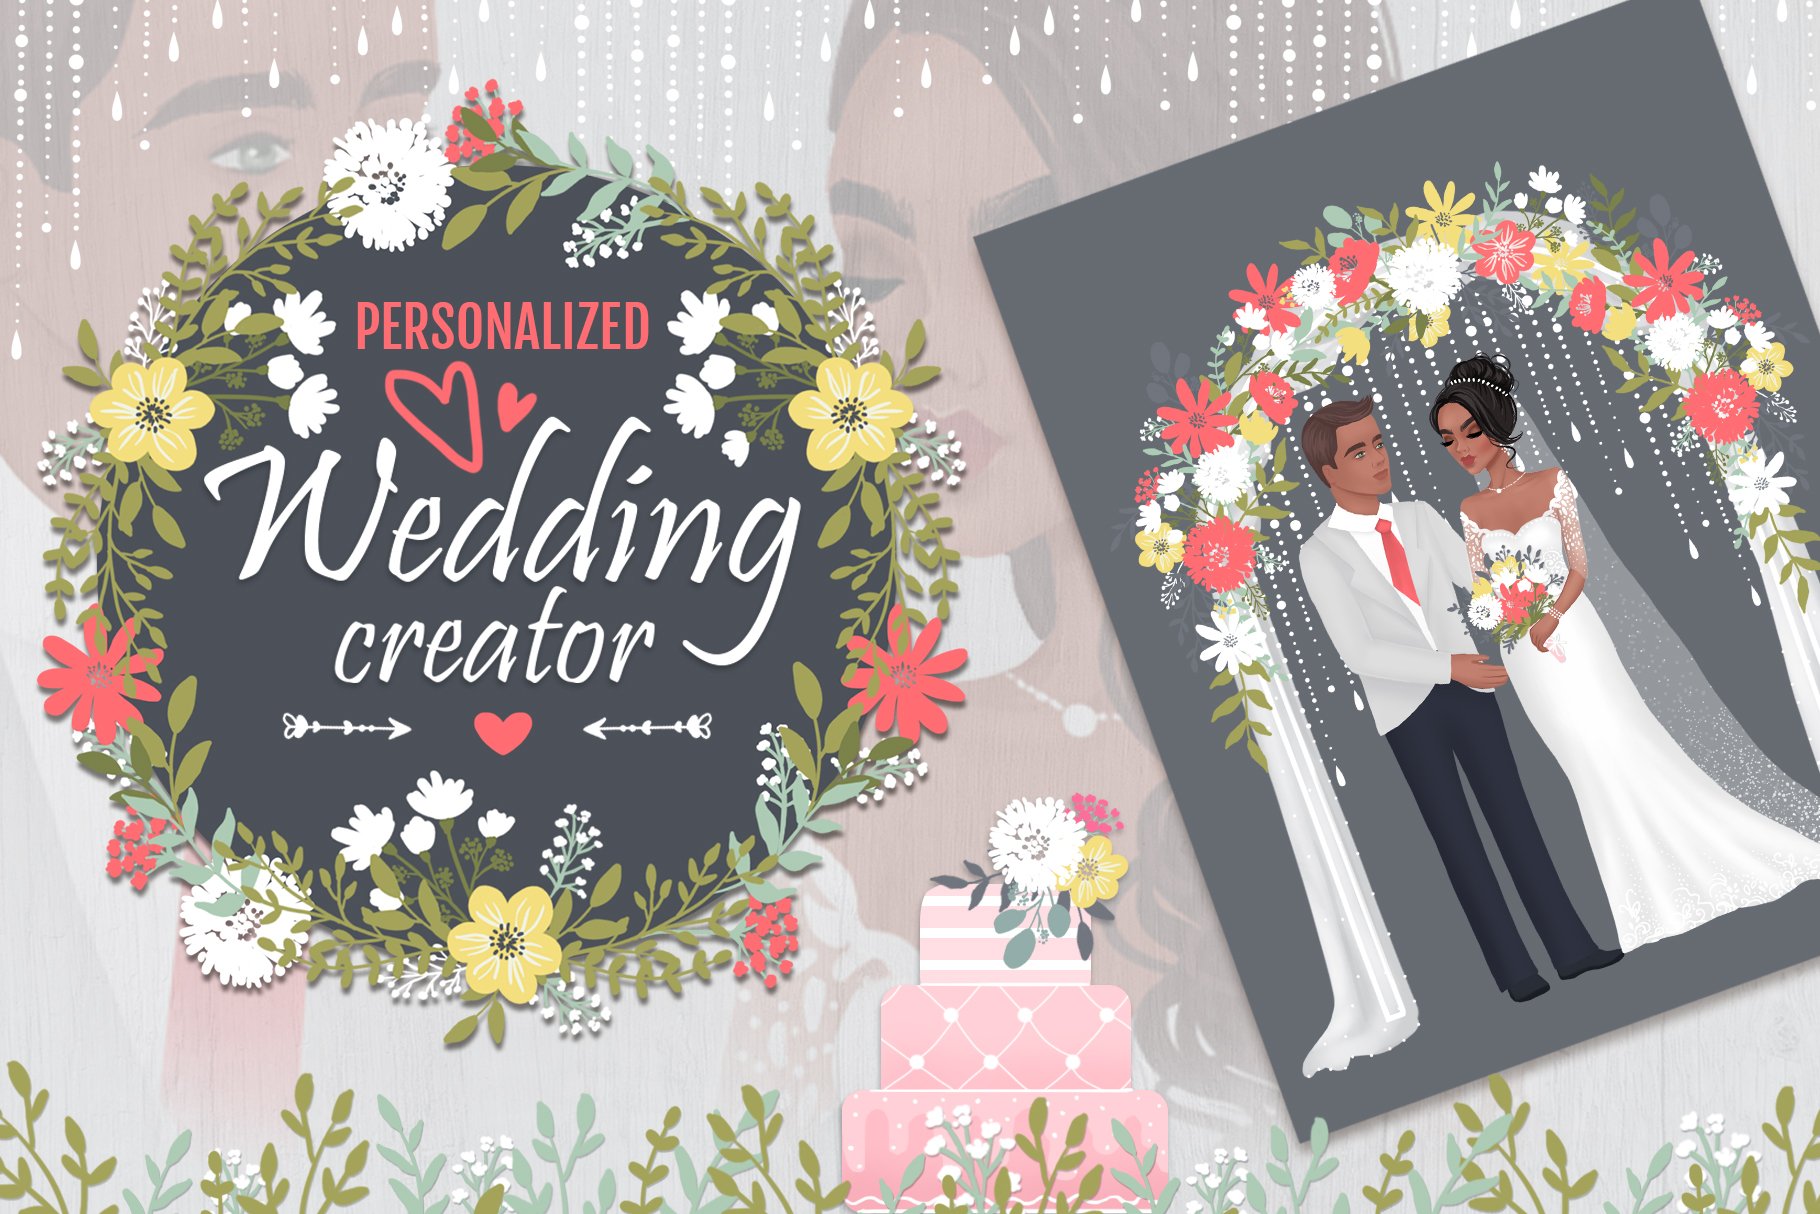 Wedding personalized creator cover image.